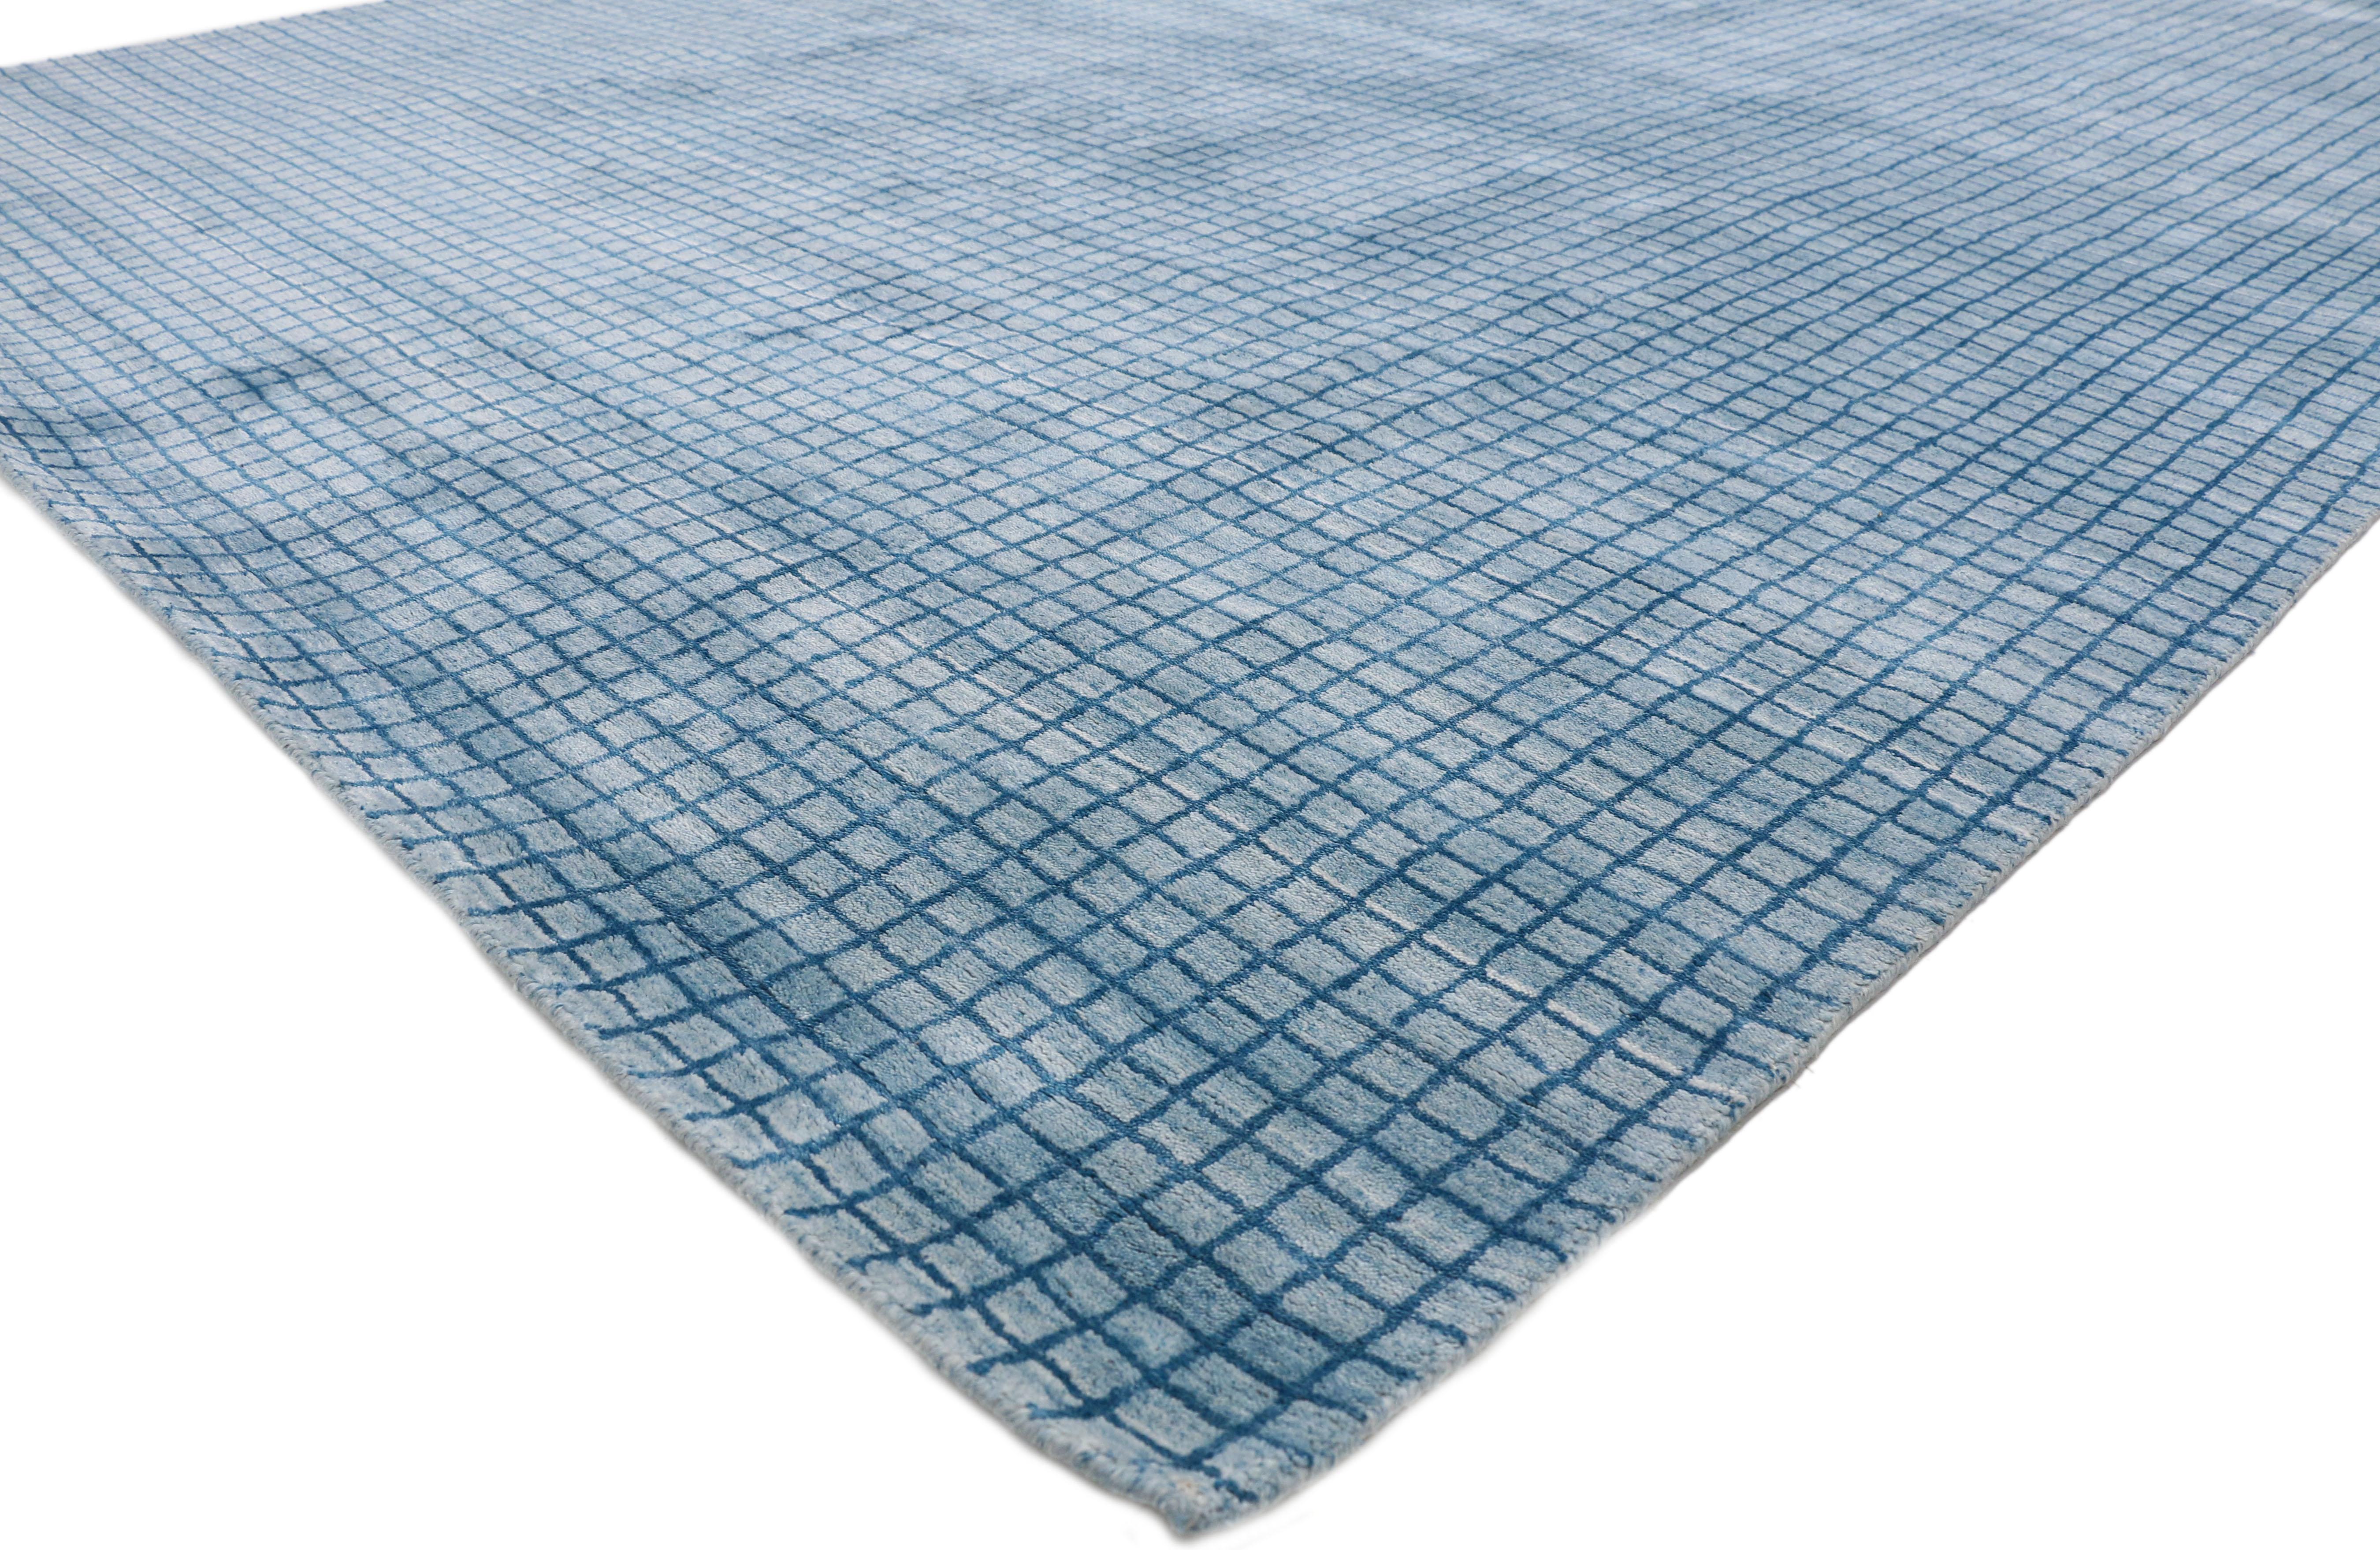 30443, contemporary Beach style area rug with Grid Pattern and Coastal Living Style. This new modern beach style area rug features a simplistic all-over geometric pattern spread across an abrashed light sky blue backdrop The dark cerulean lines